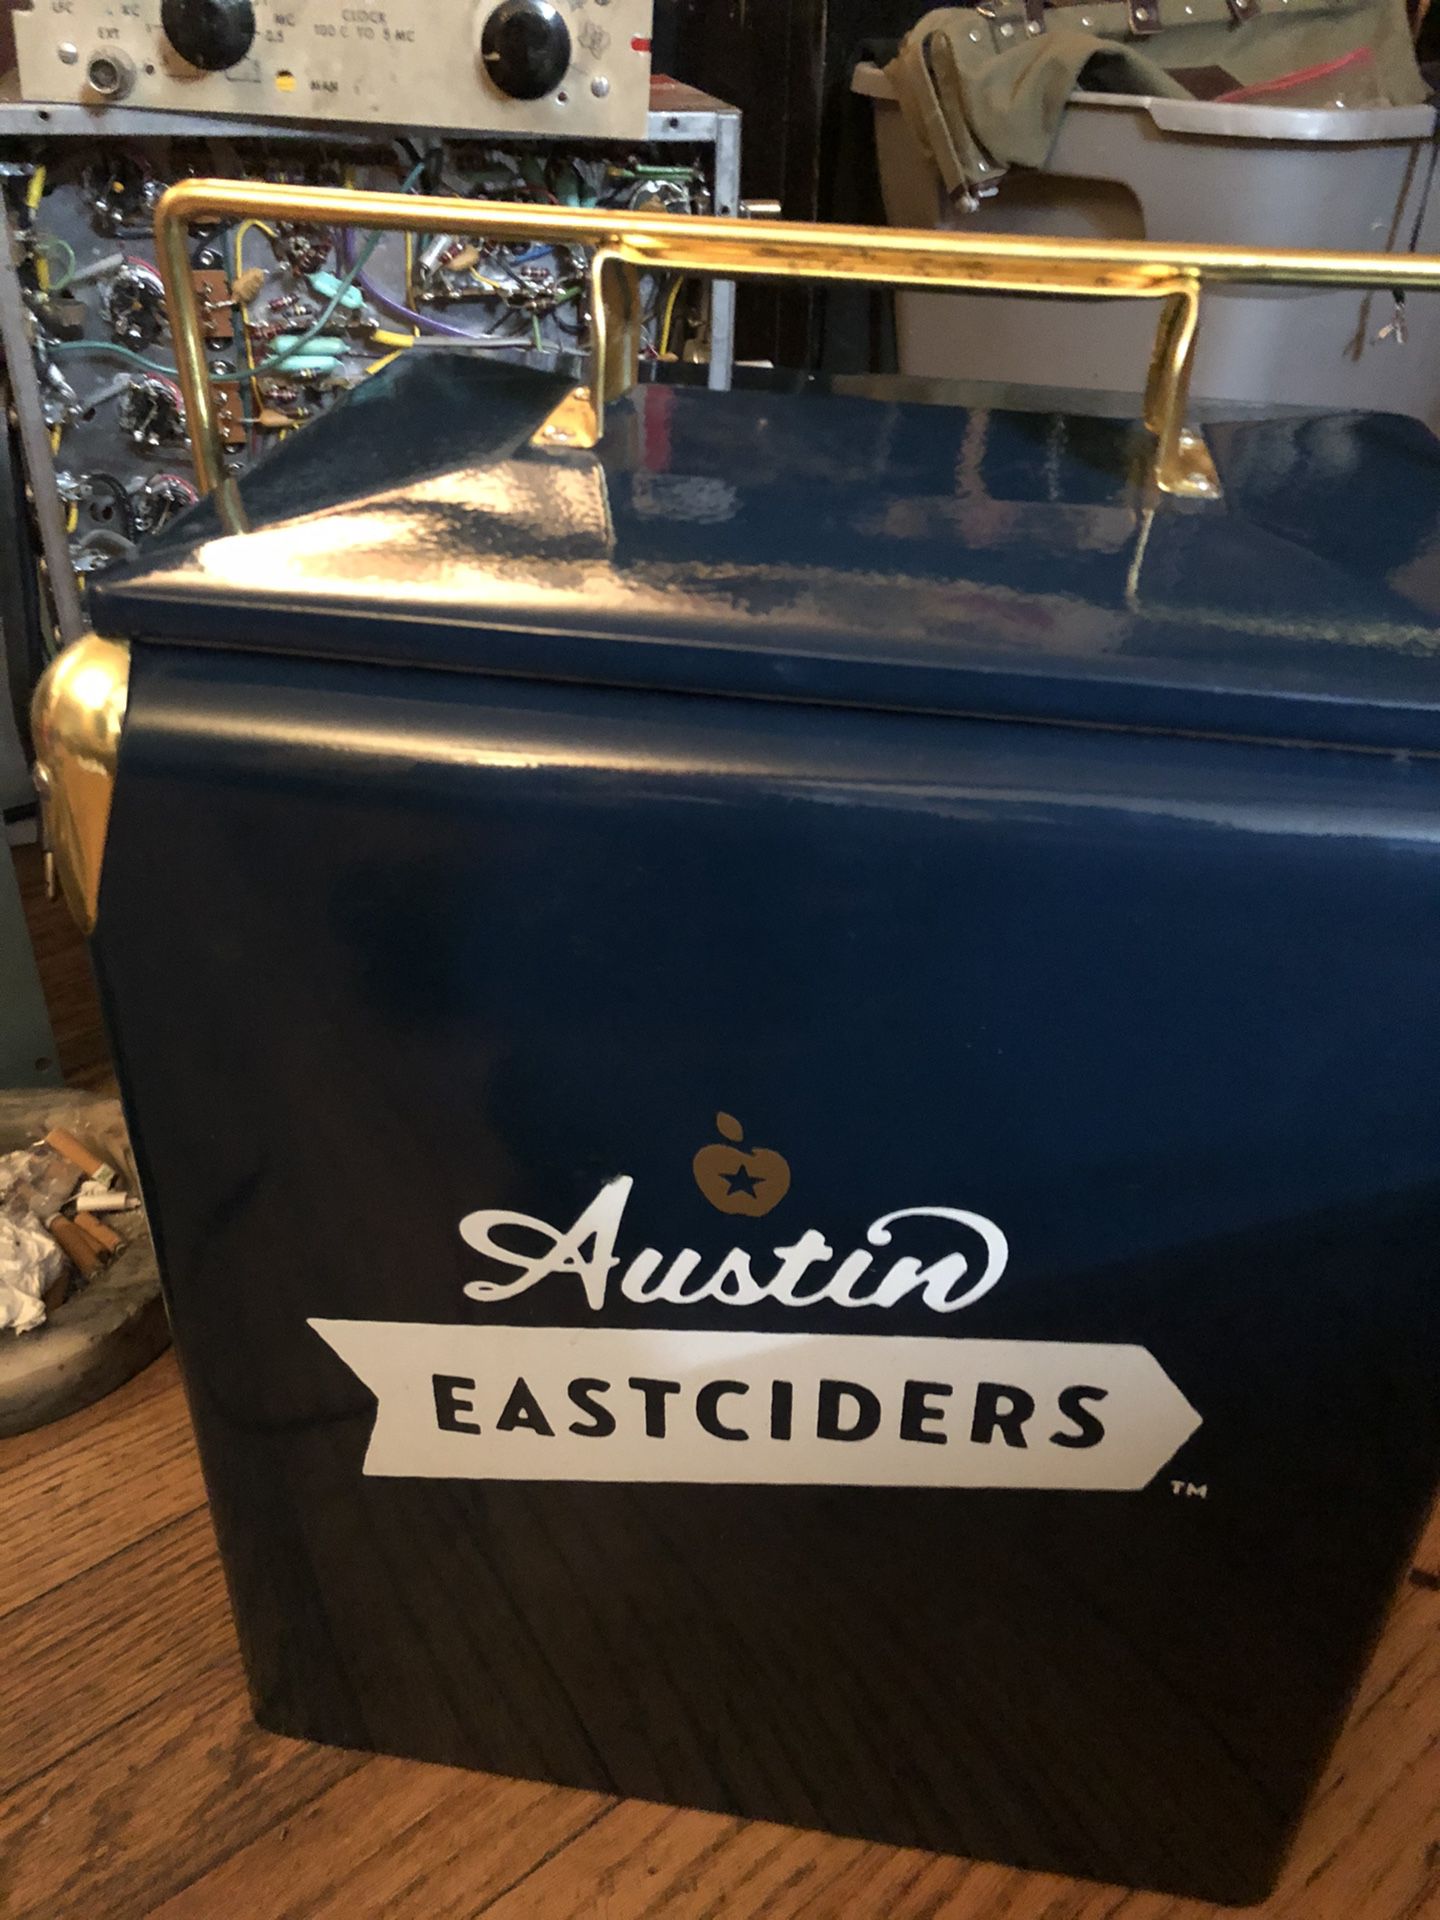 Vintage Style Metal ice Chest Cooler Yeti Eastciders Austin